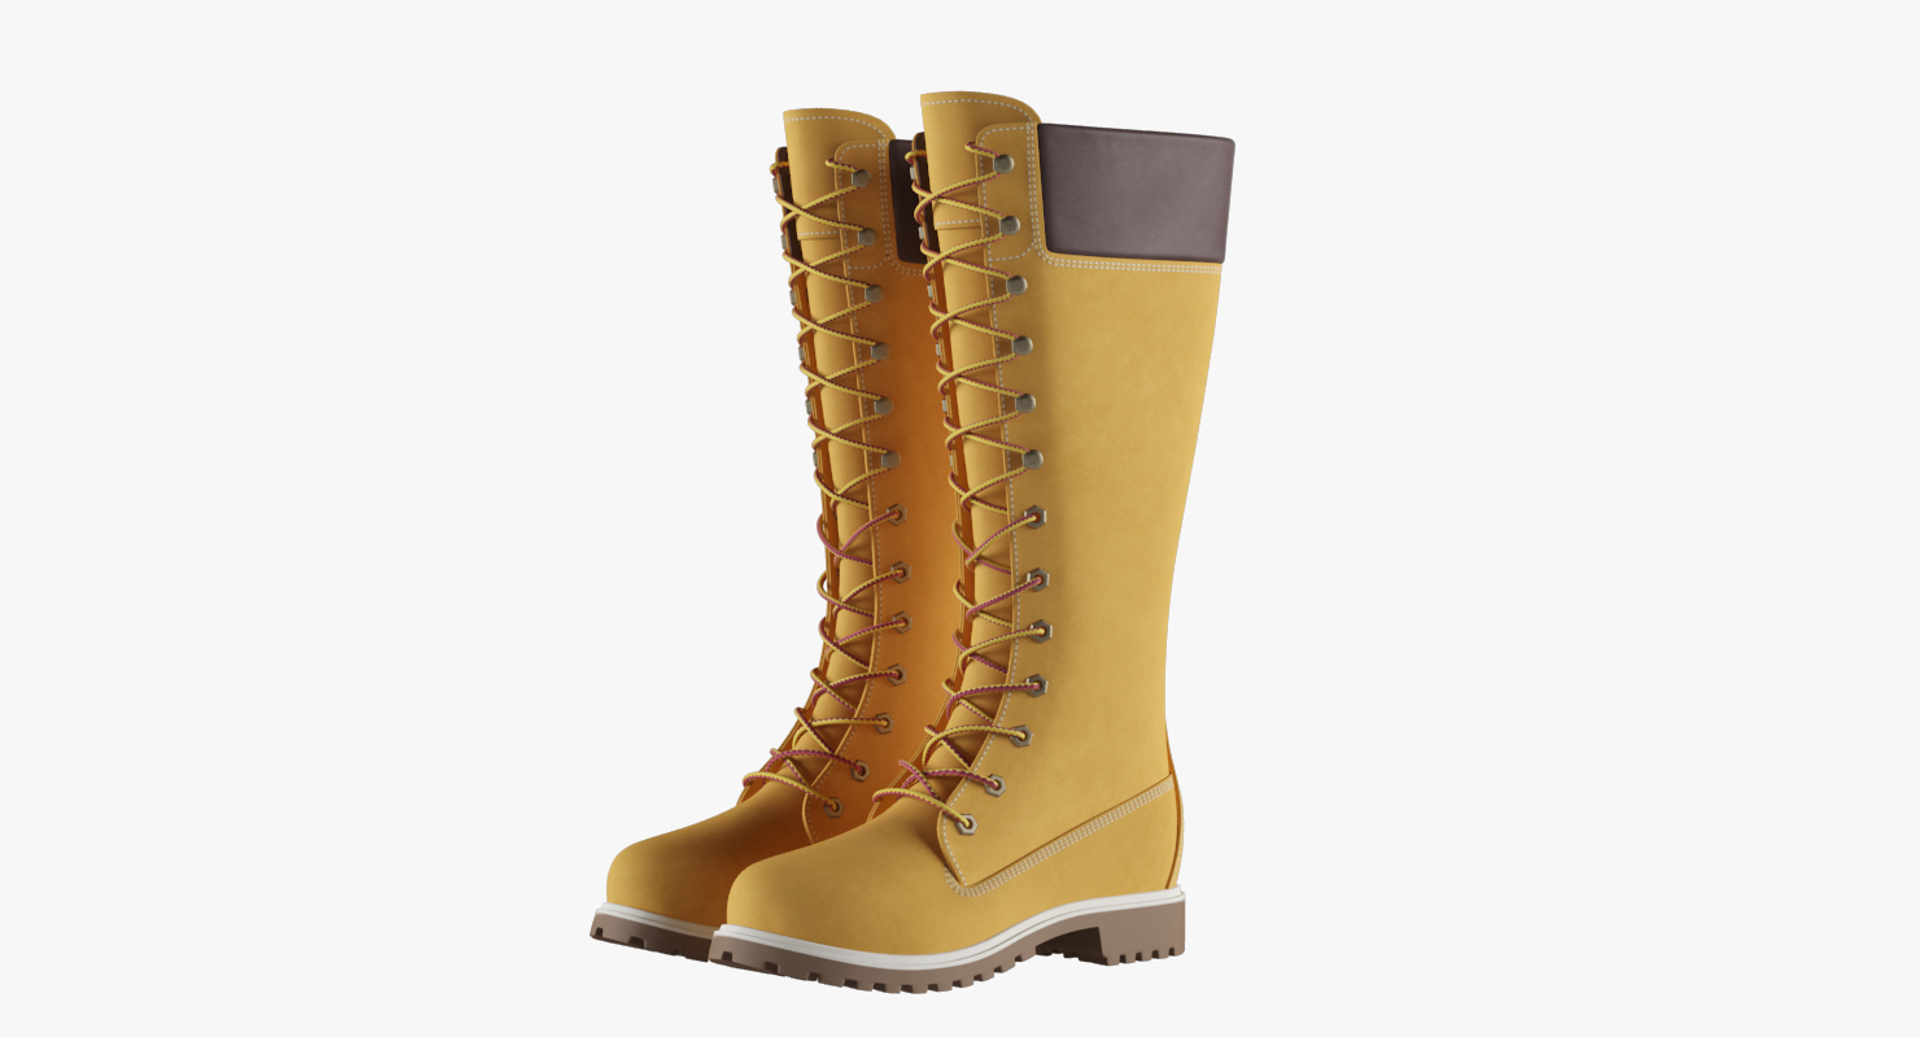 3D leather 14-inch yellow boots model - TurboSquid 1362120